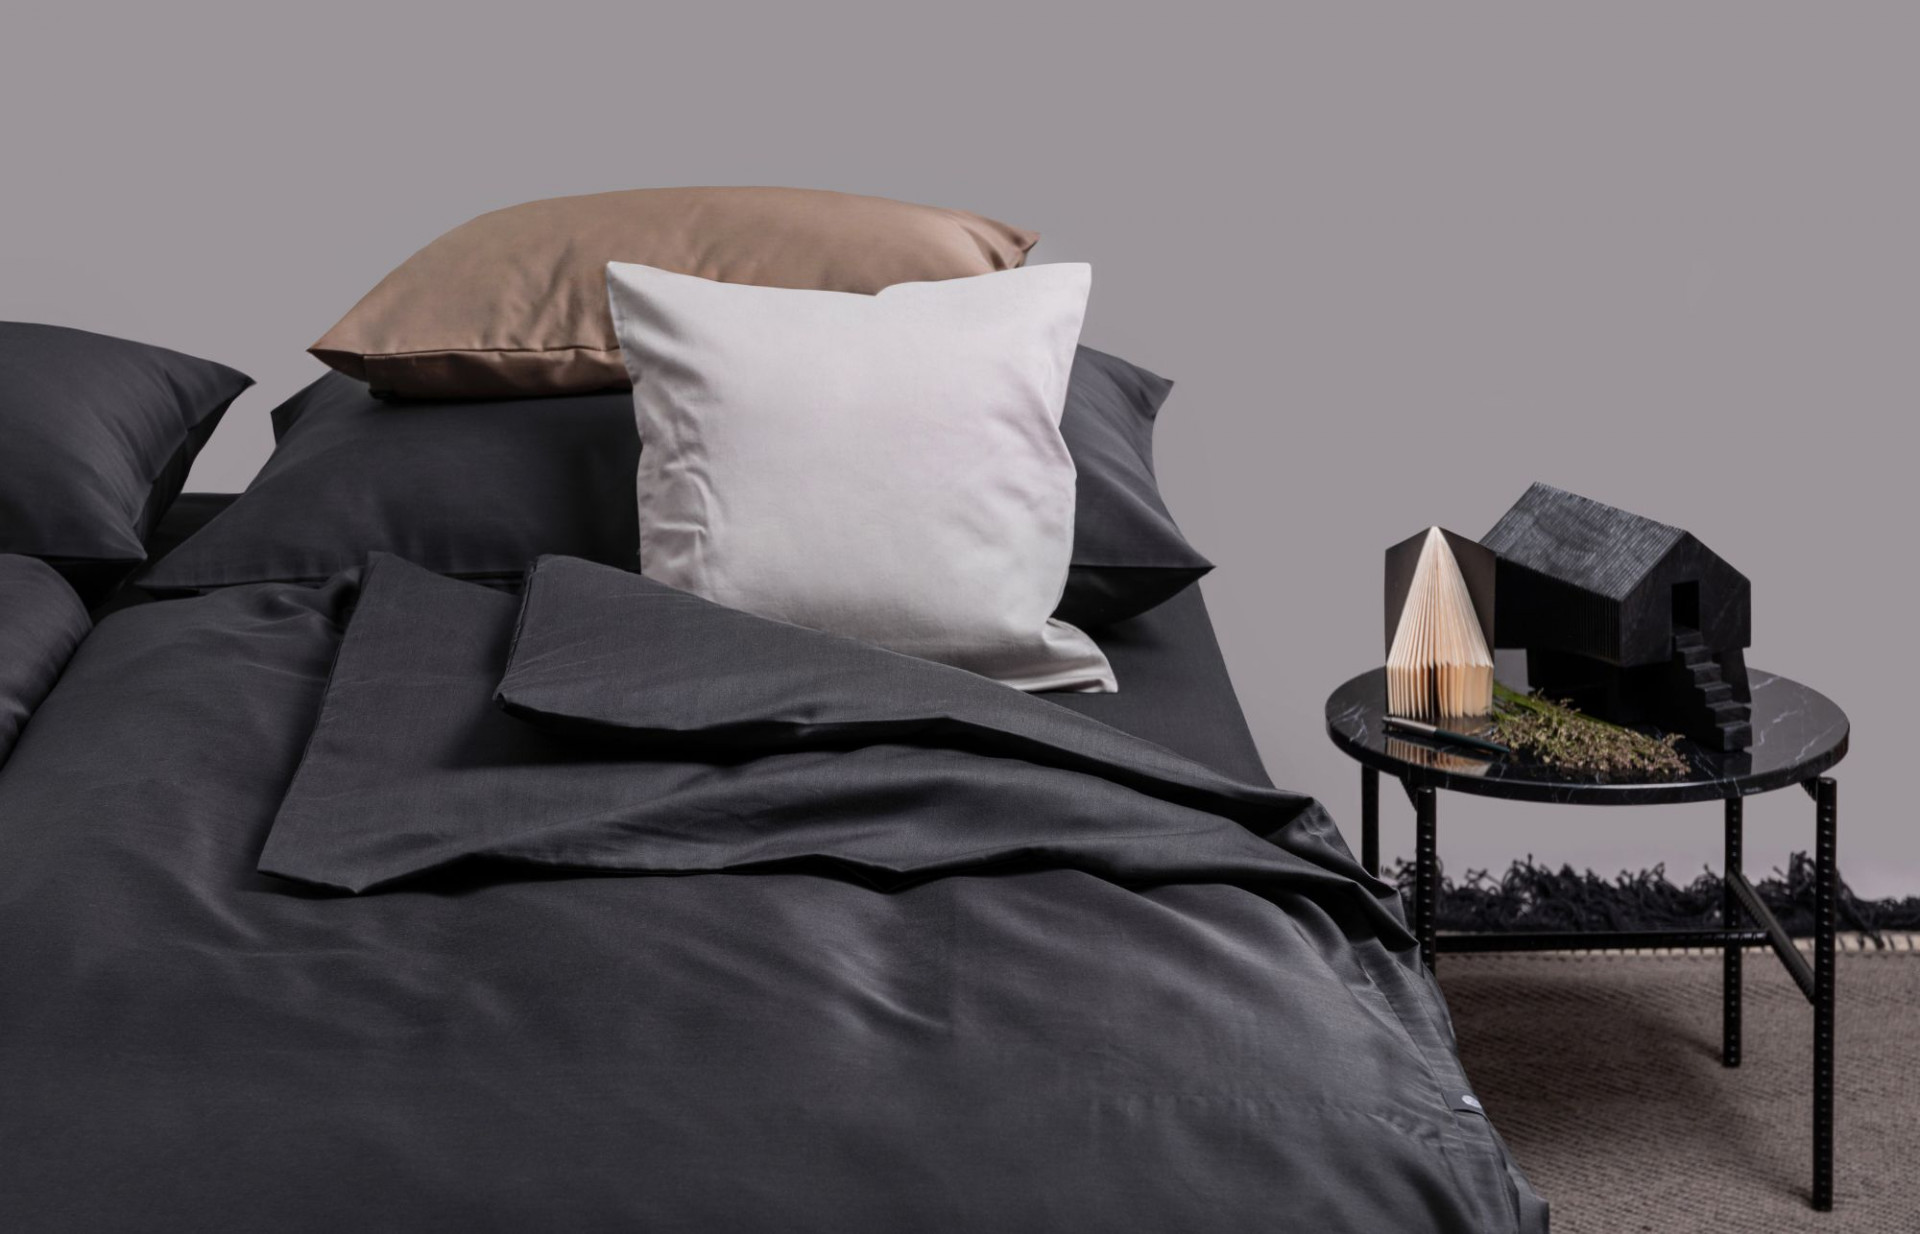 Wrinkle-Free Bedding Without Having to Iron